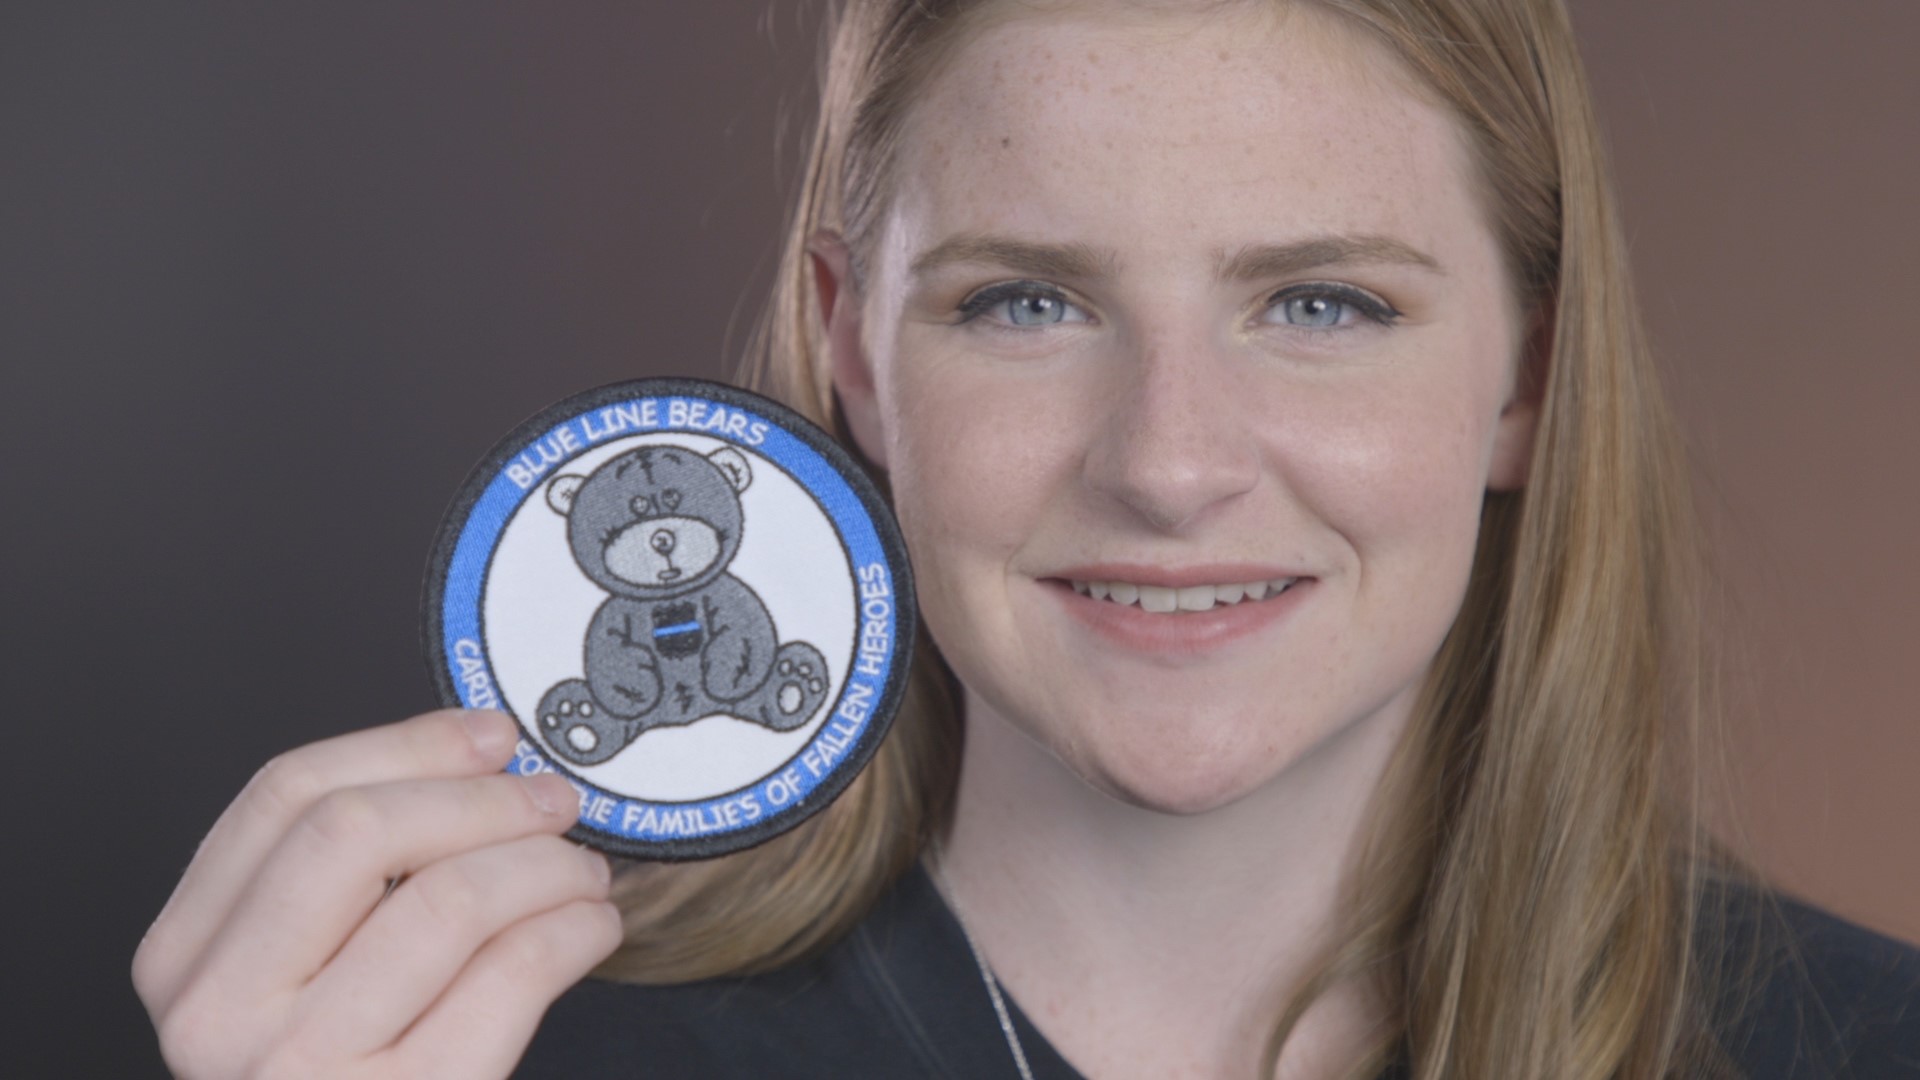 This teenage police officer's daughter makes custom teddy bears for families of the fallen.